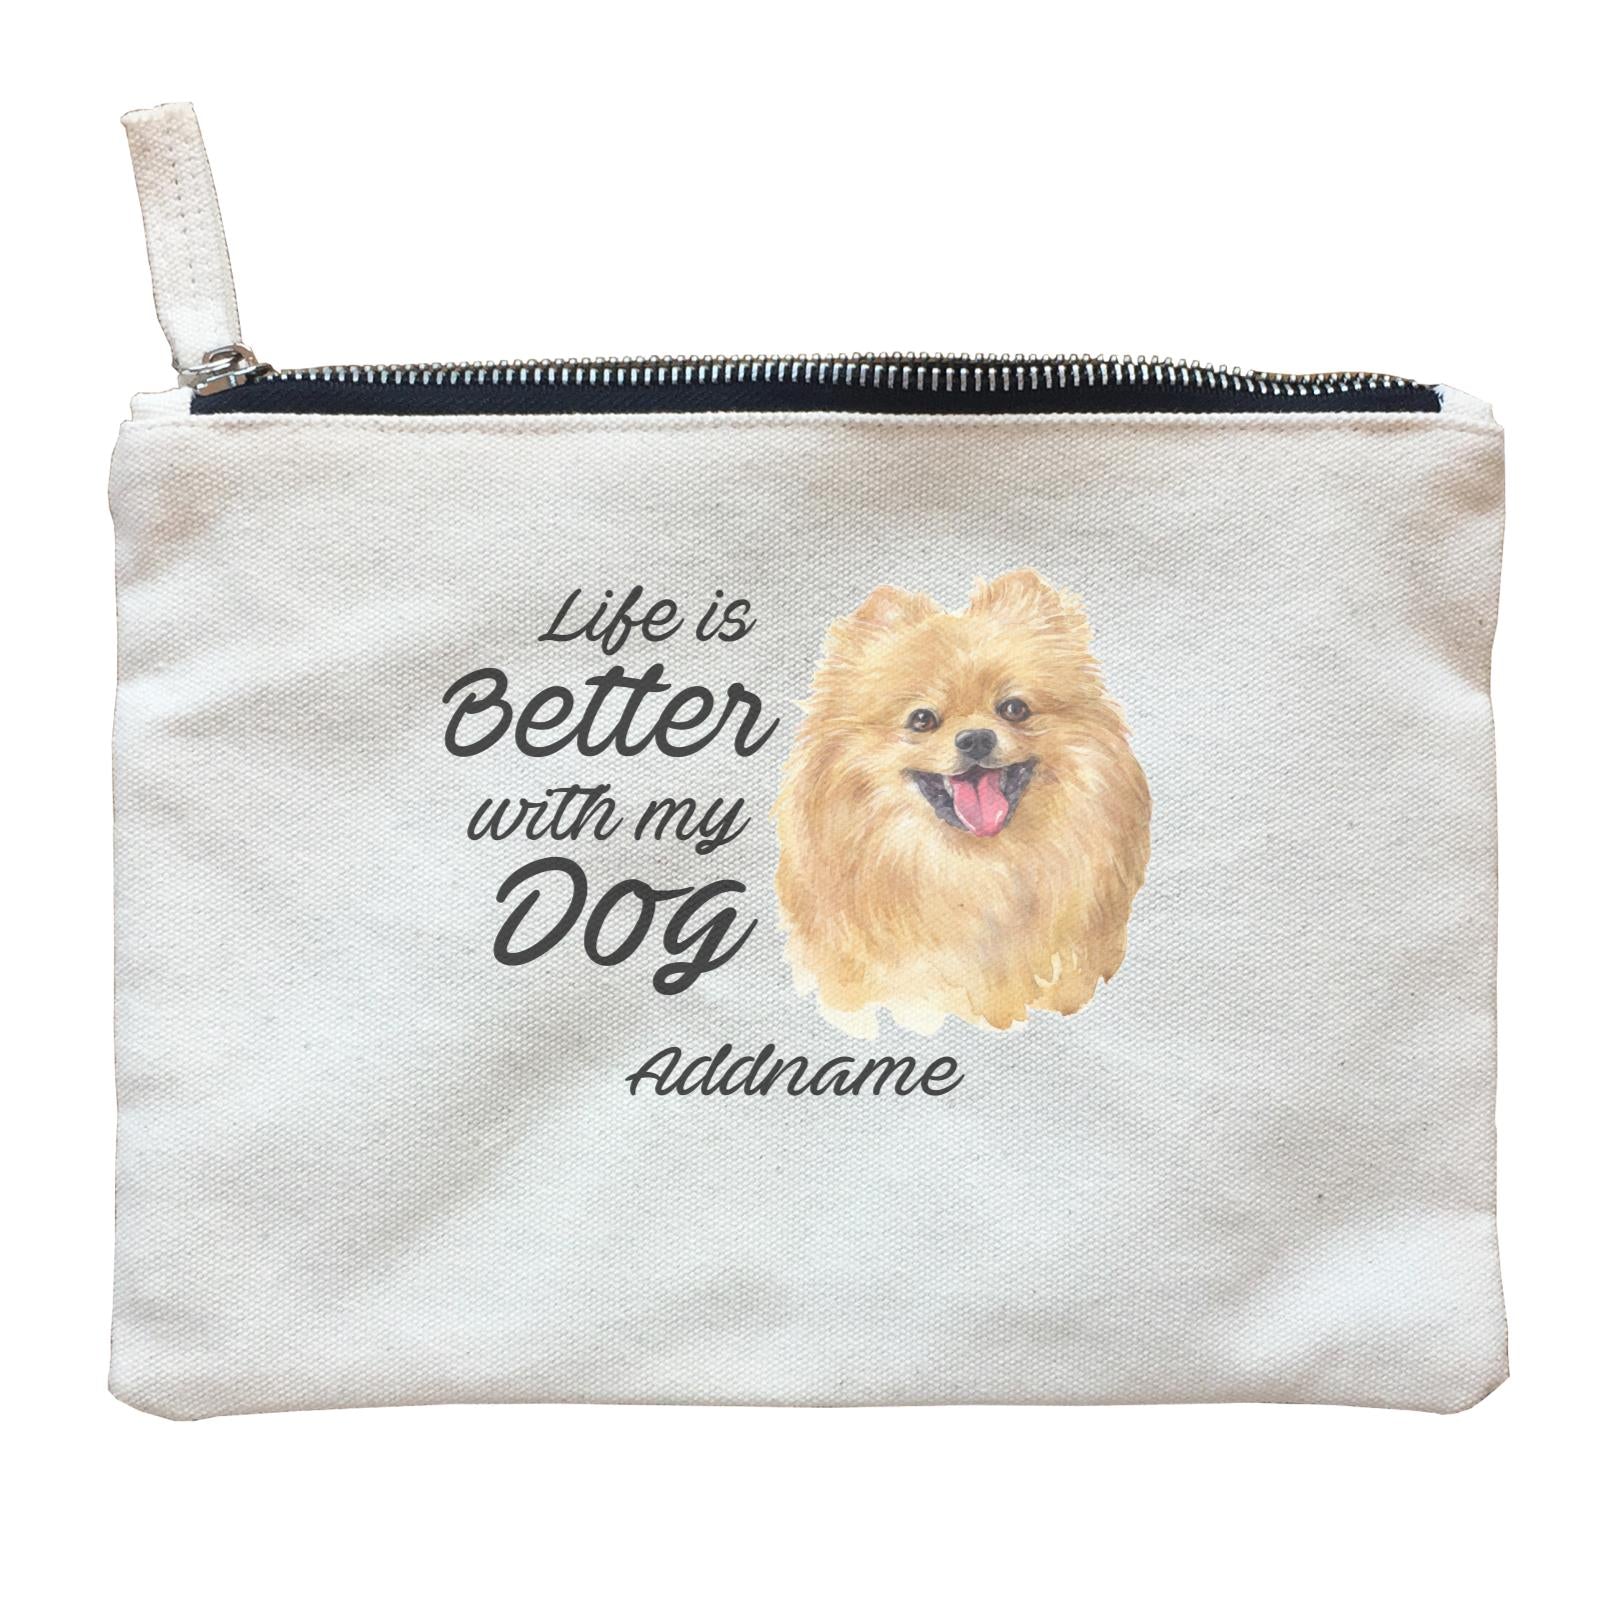 Watercolor Life is Better With My Dog Pomeranian Addname Zipper Pouch